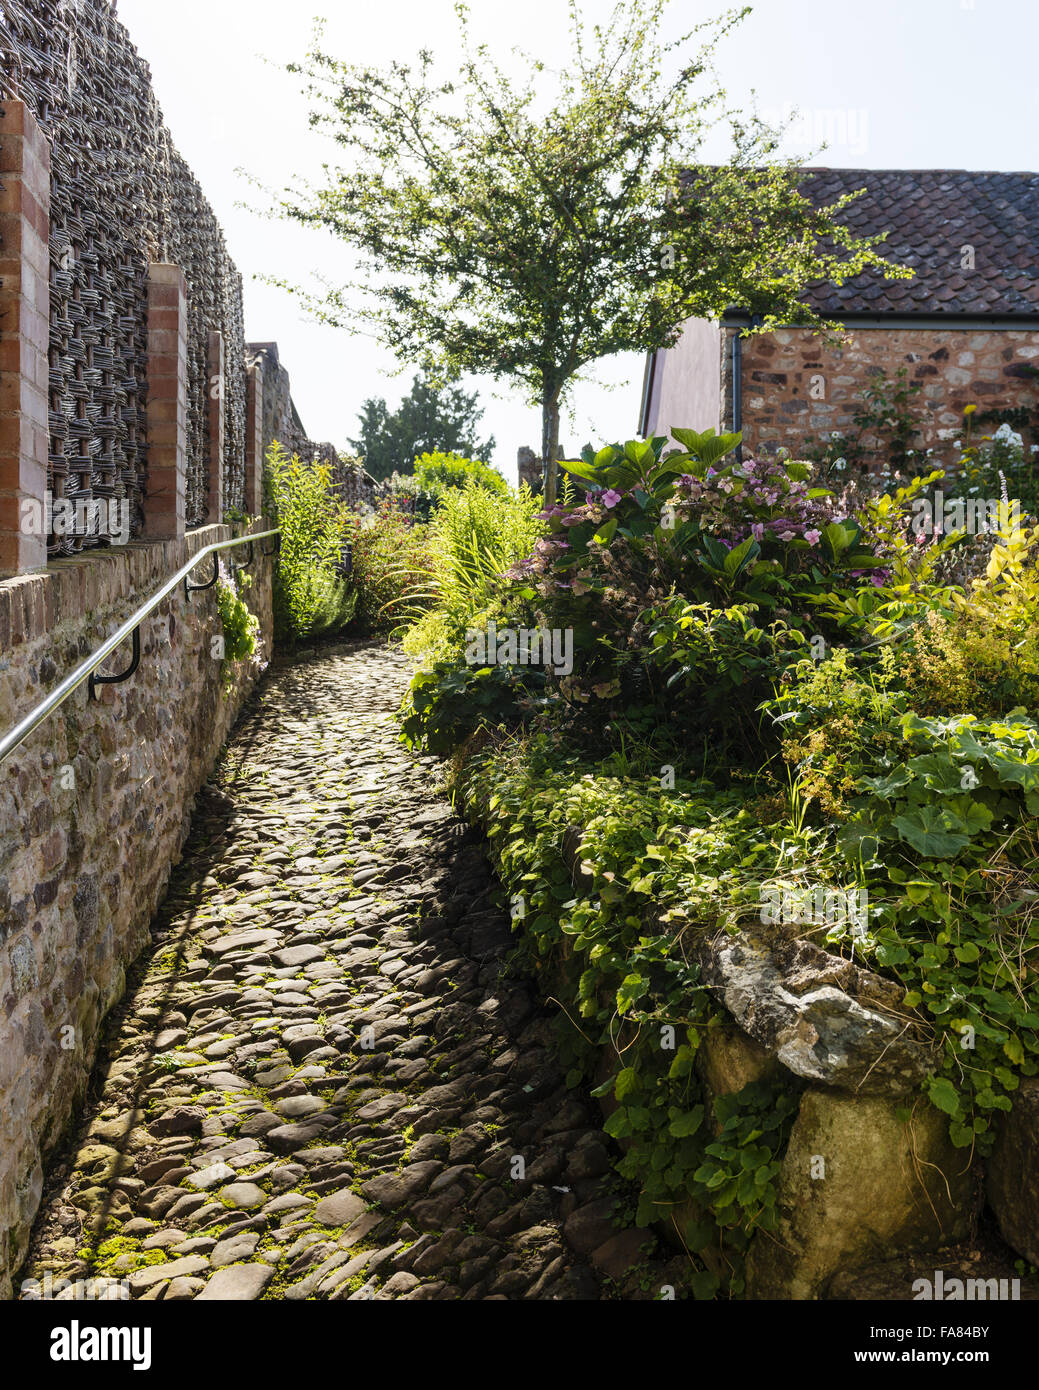 The cobbled path leading from the cottage to the wild garden at Coleridge Cottage, Somerset. Coleridge Cottage was the home of Samuel Taylor Coleridge between 1797 and 1800. Stock Photo